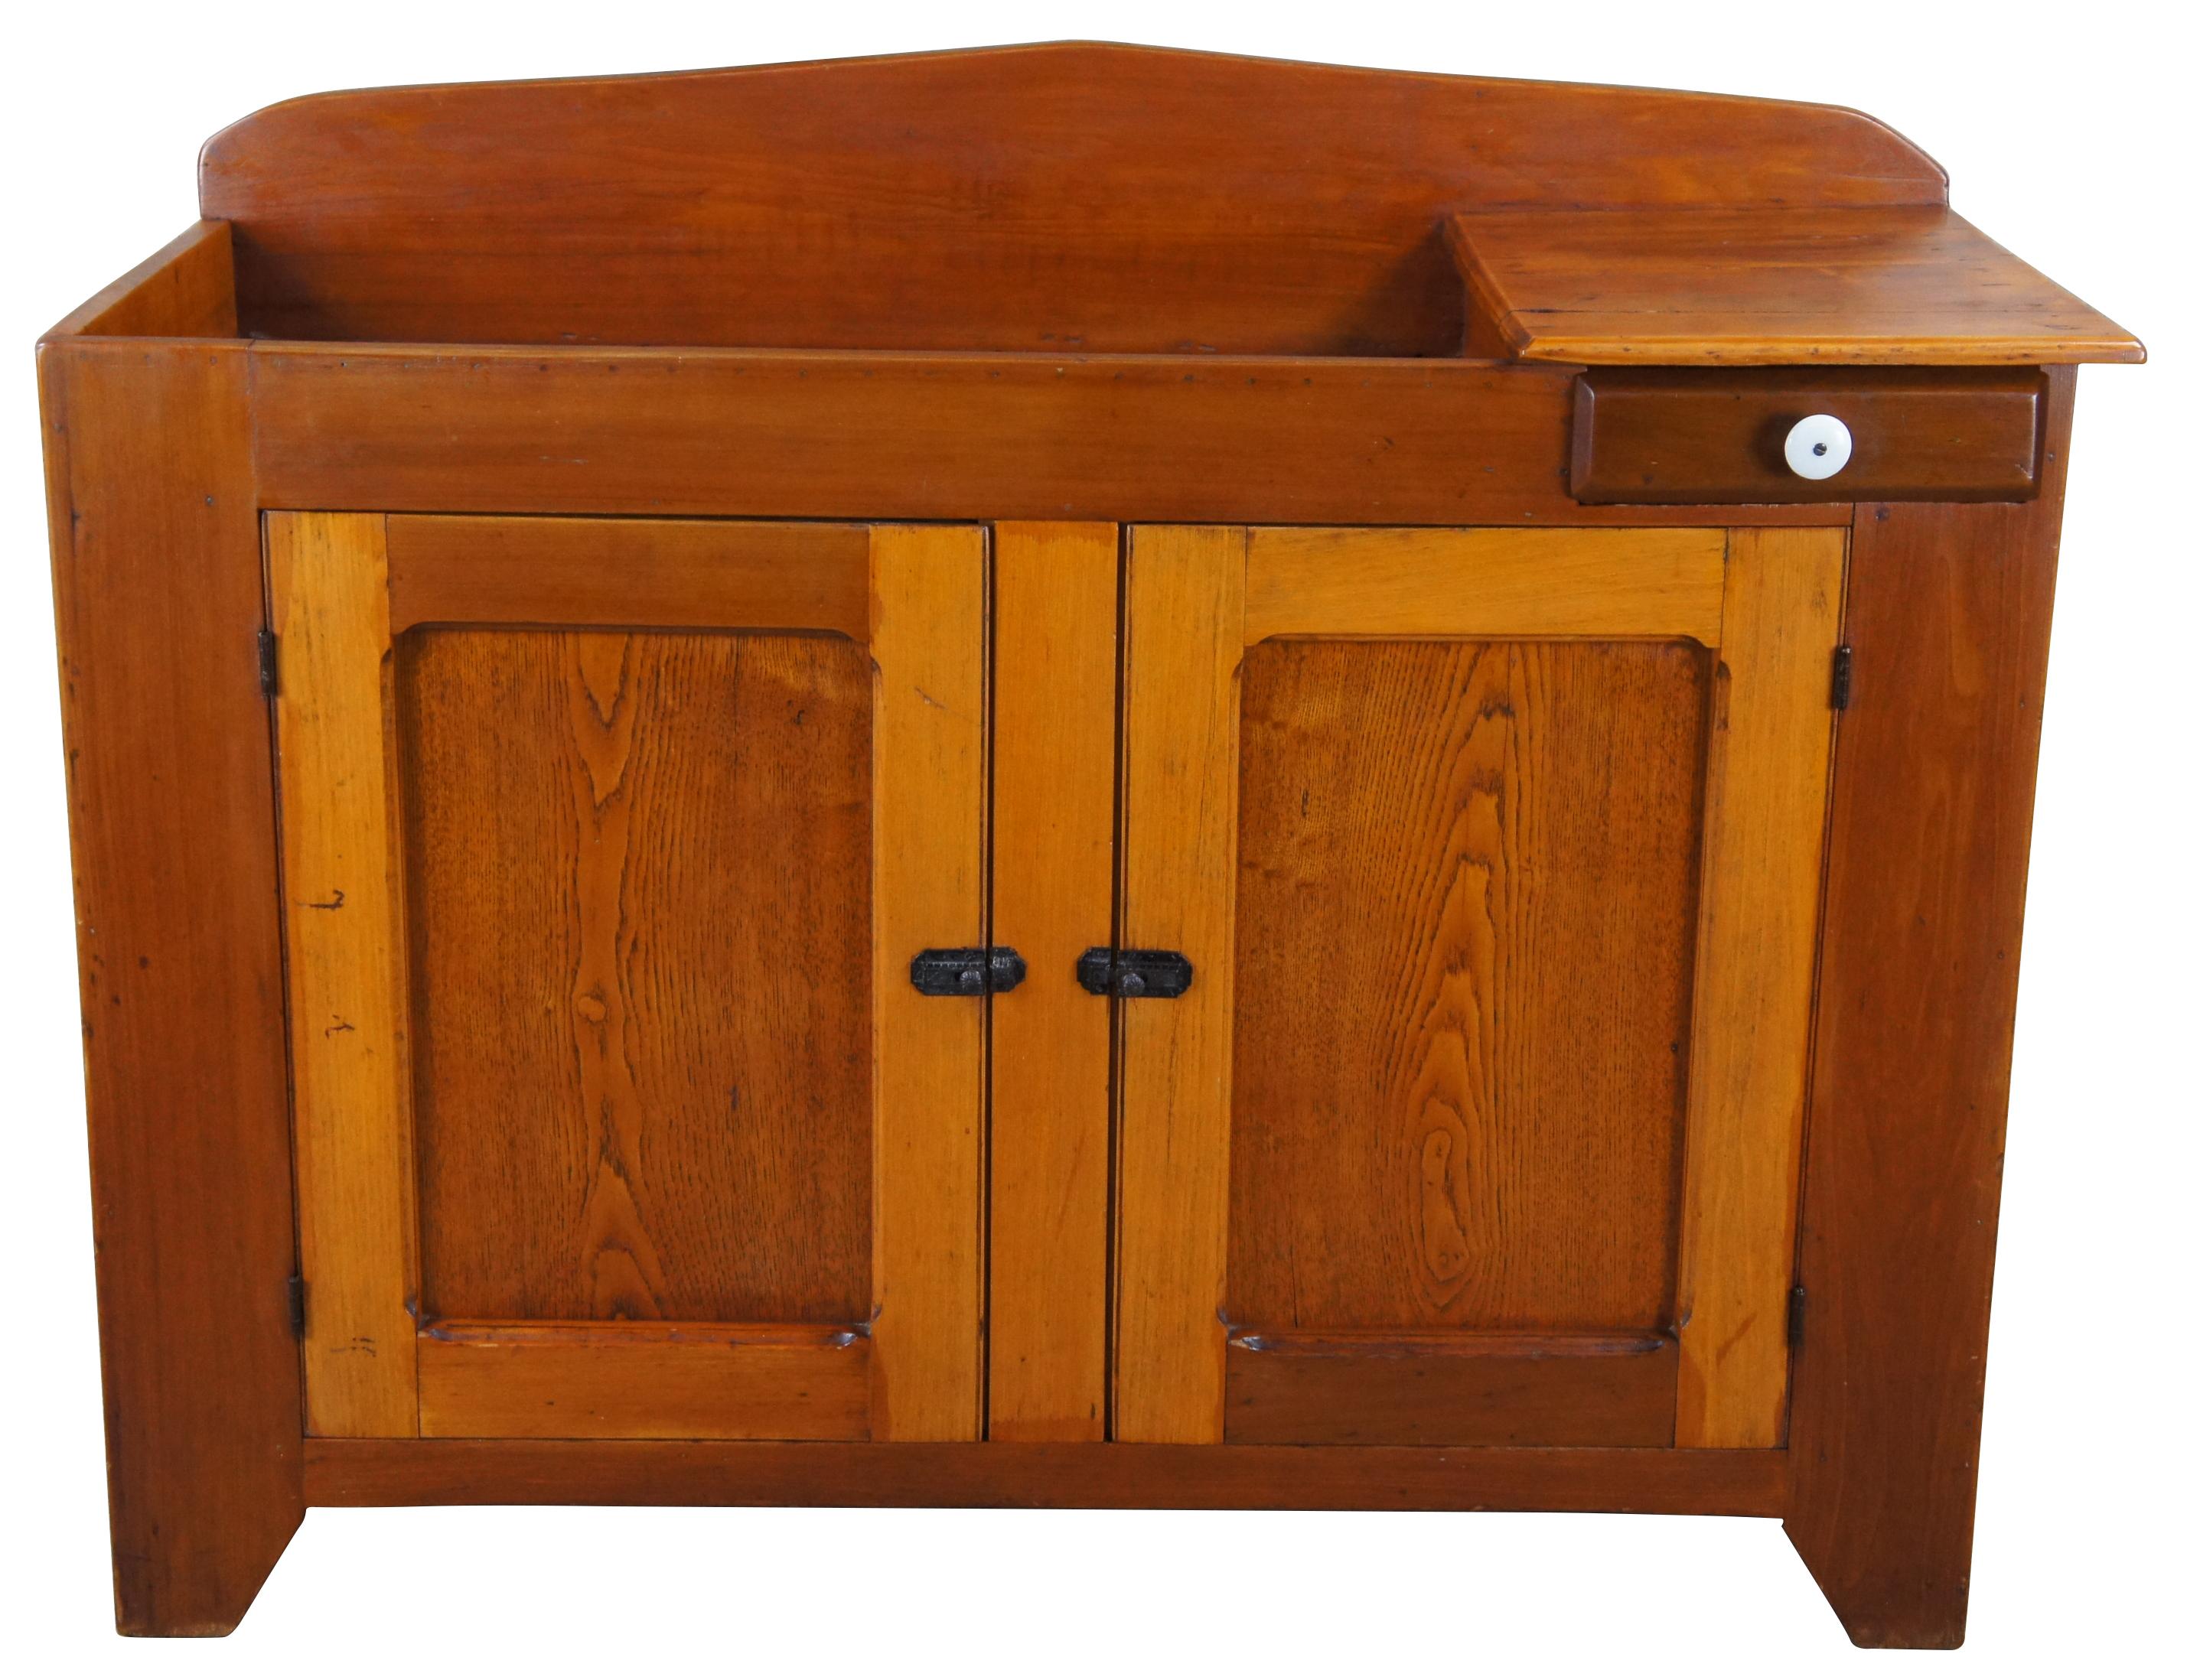 Primitive antique farmhouse dry sink. Made from oak and pine. Features a large basin with a small work surface over a drawer and lower cabinet with shelf for storage. Lower aprons along the side have a serpentine cut apron Latches along the lower